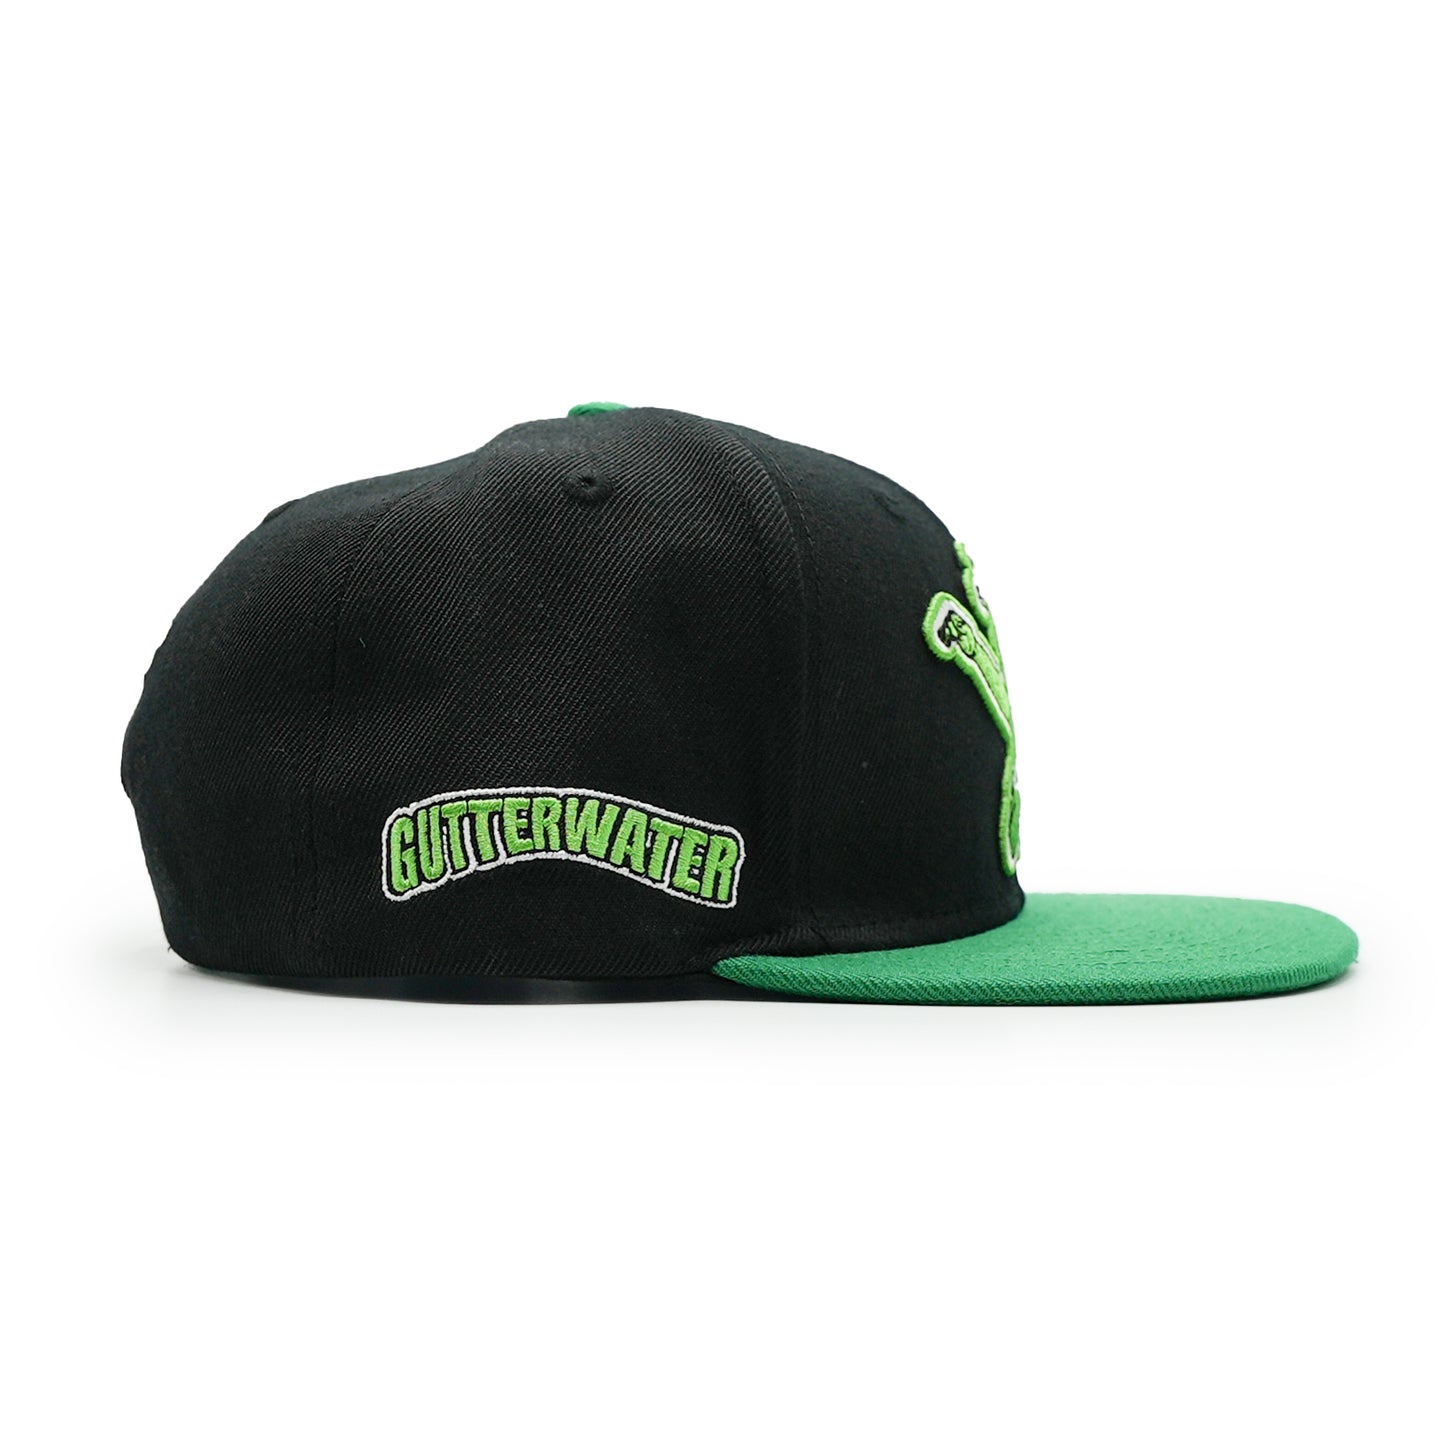 Elements Snapback - Gutterwater - Black and Green